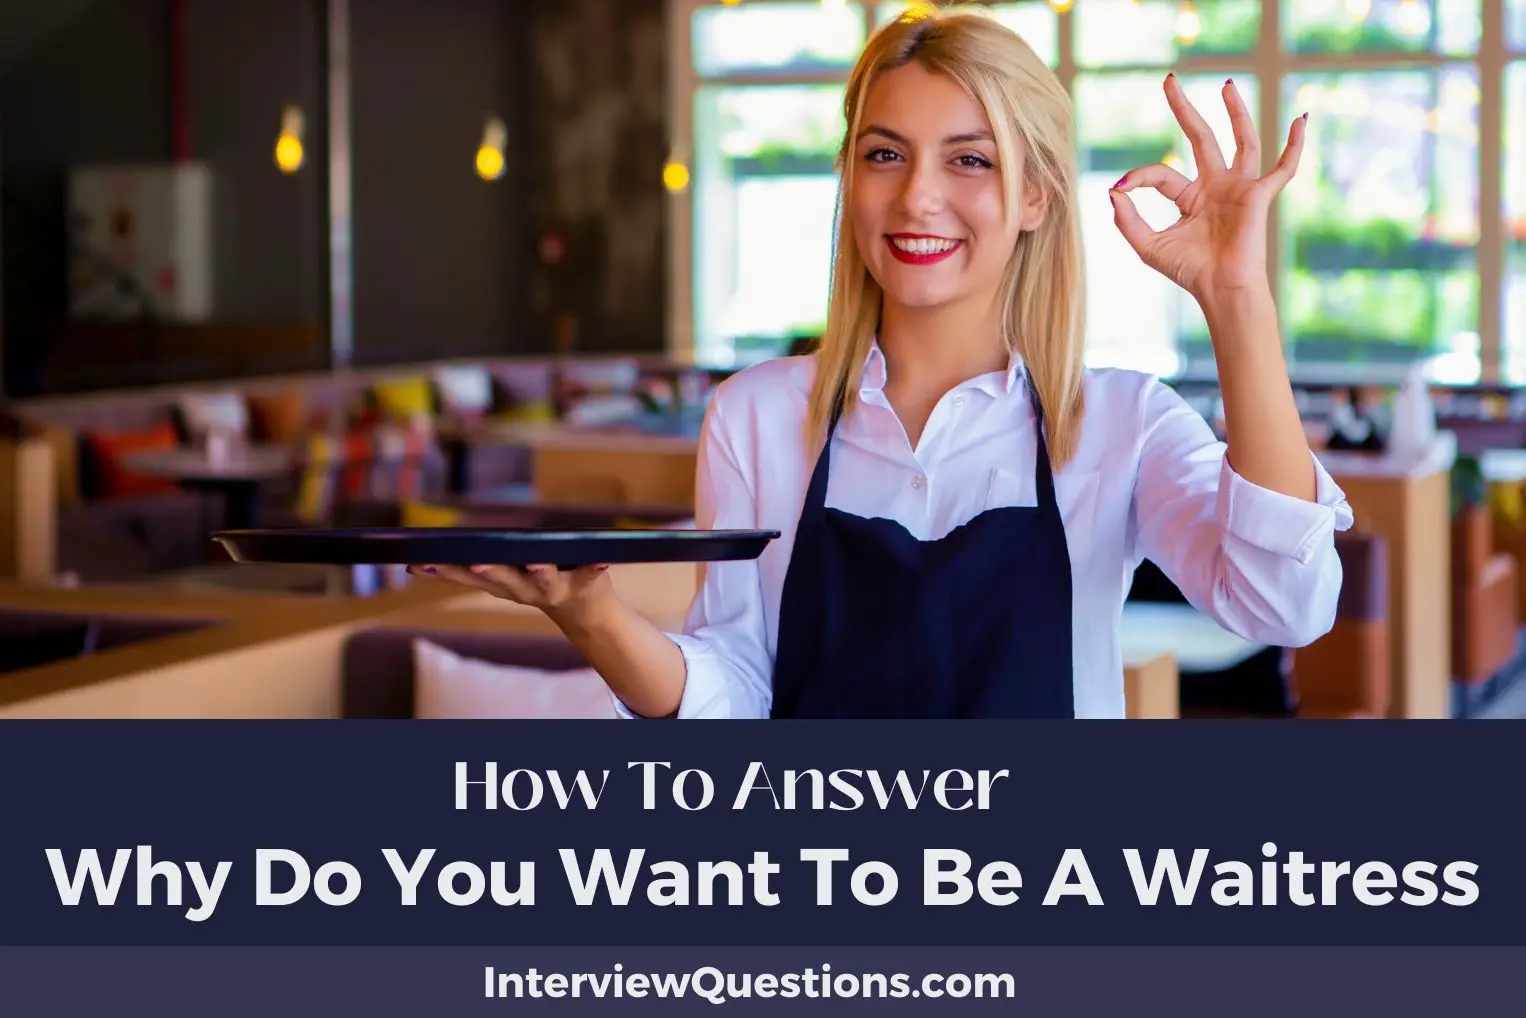 Why Do You Want To Be A Waitress